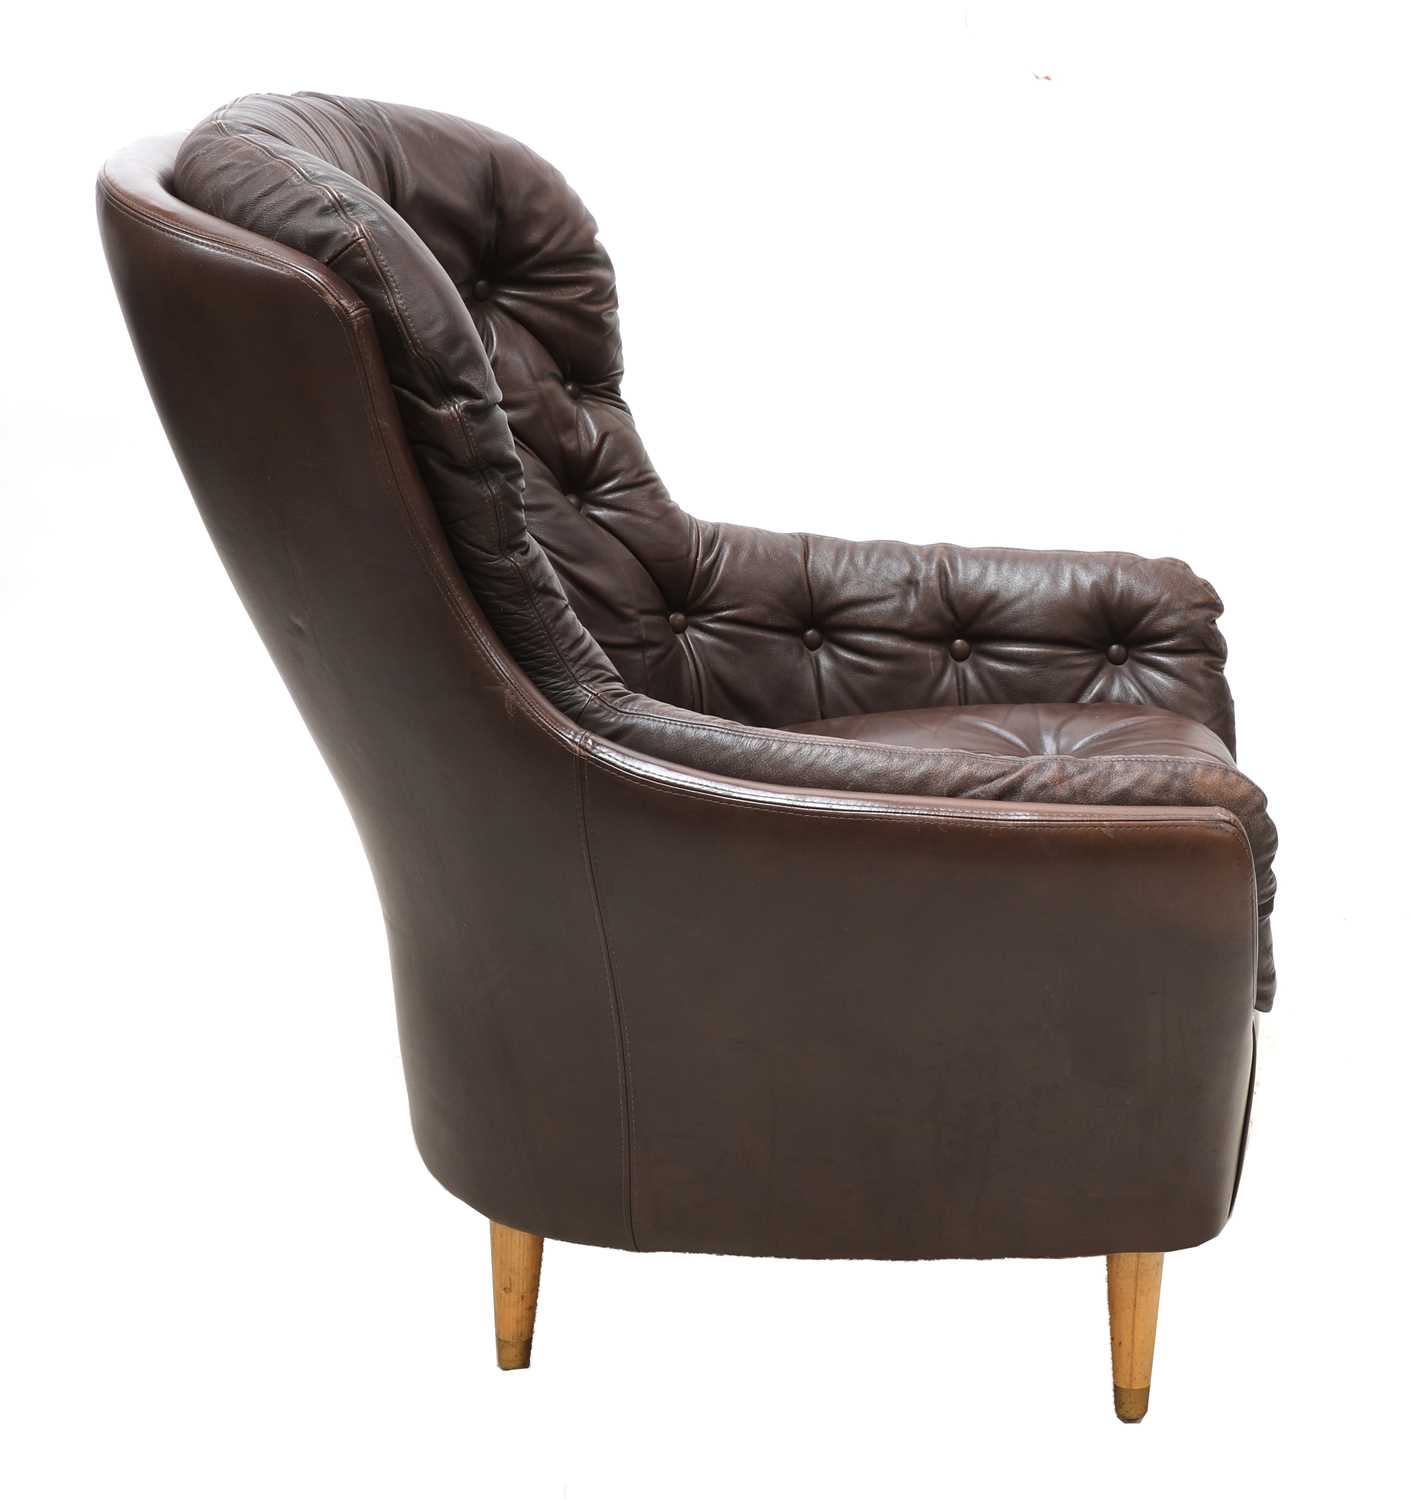 A Danish leather button back armchair, - Image 2 of 3